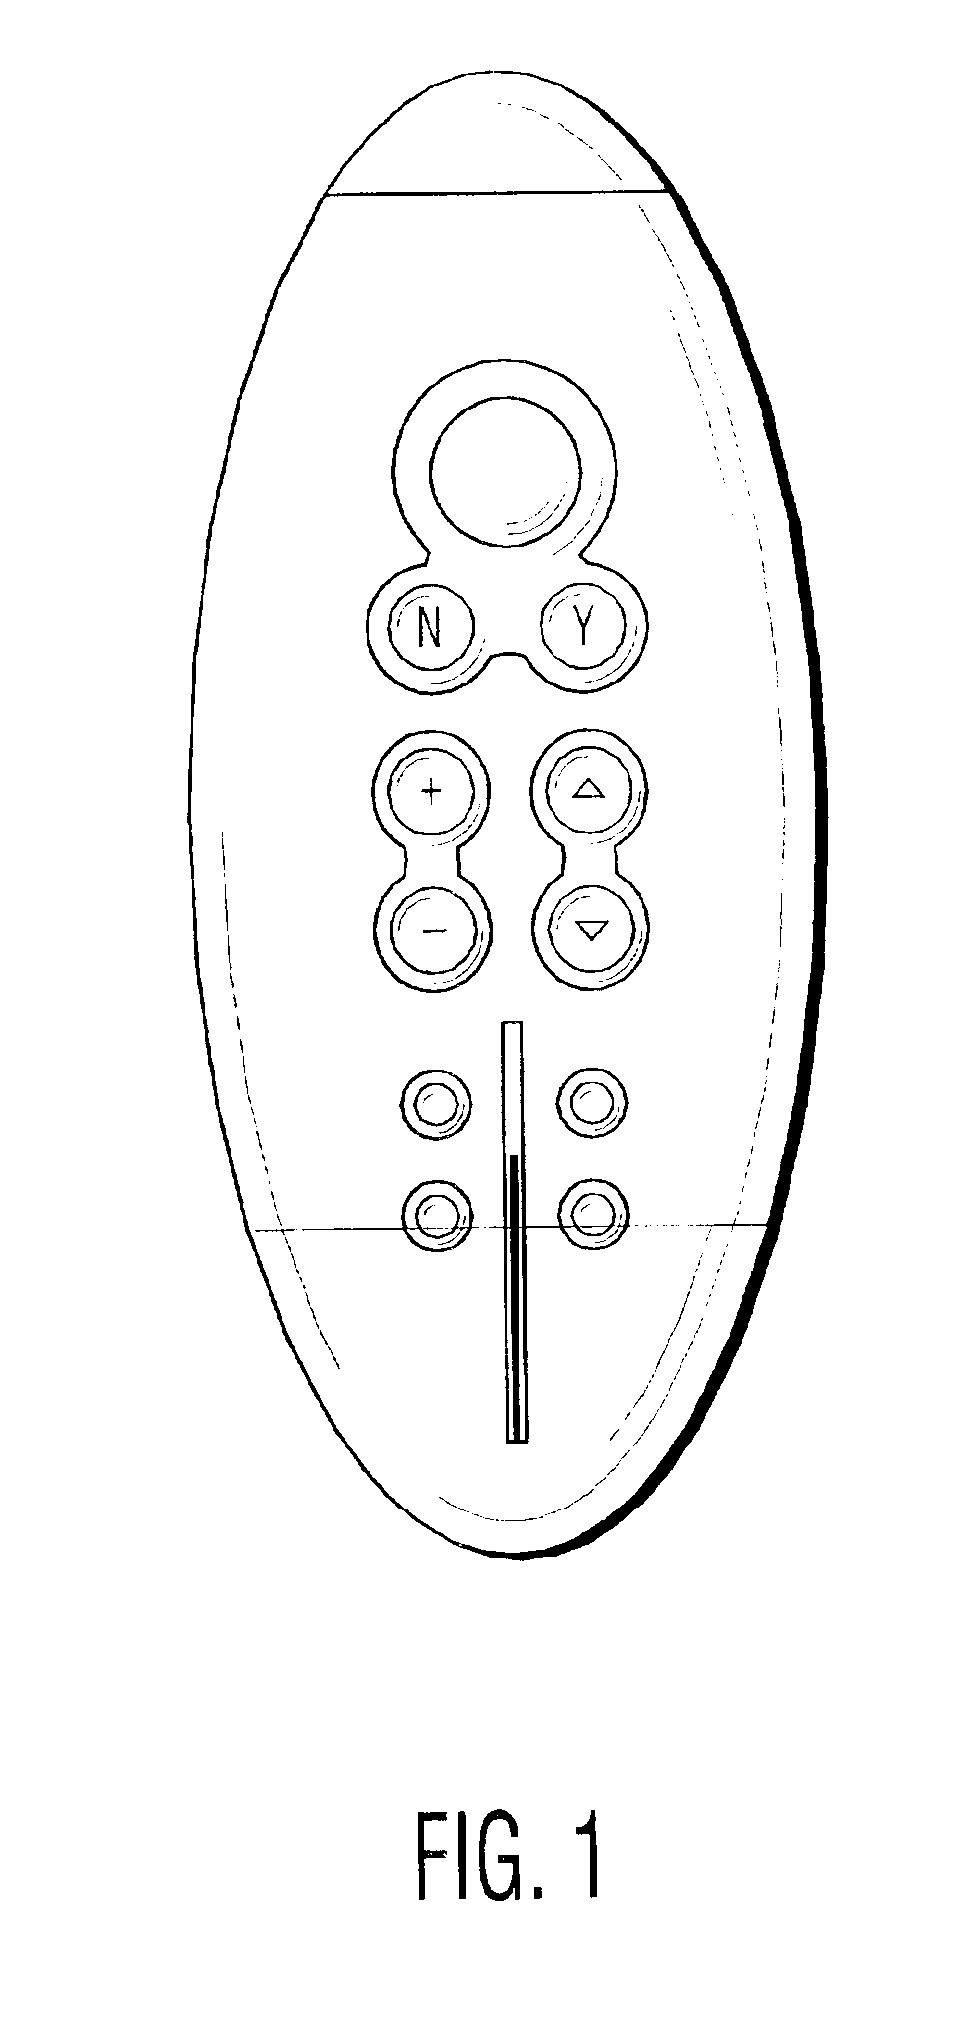 Remote control with status indicator